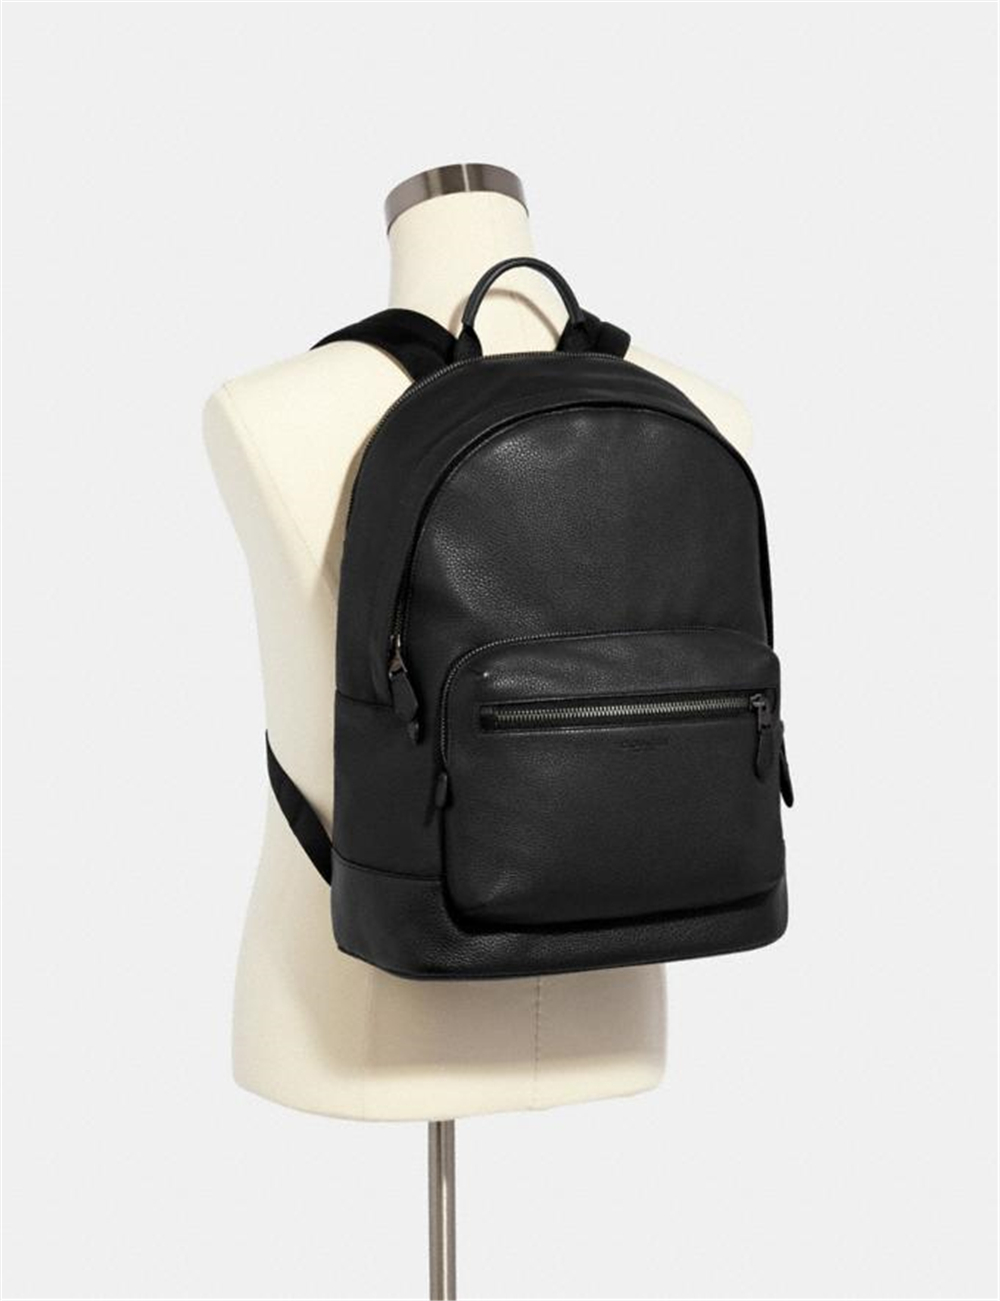 Coach 2854 Pebbled Leather West Backpack In Black - image 2 of 5